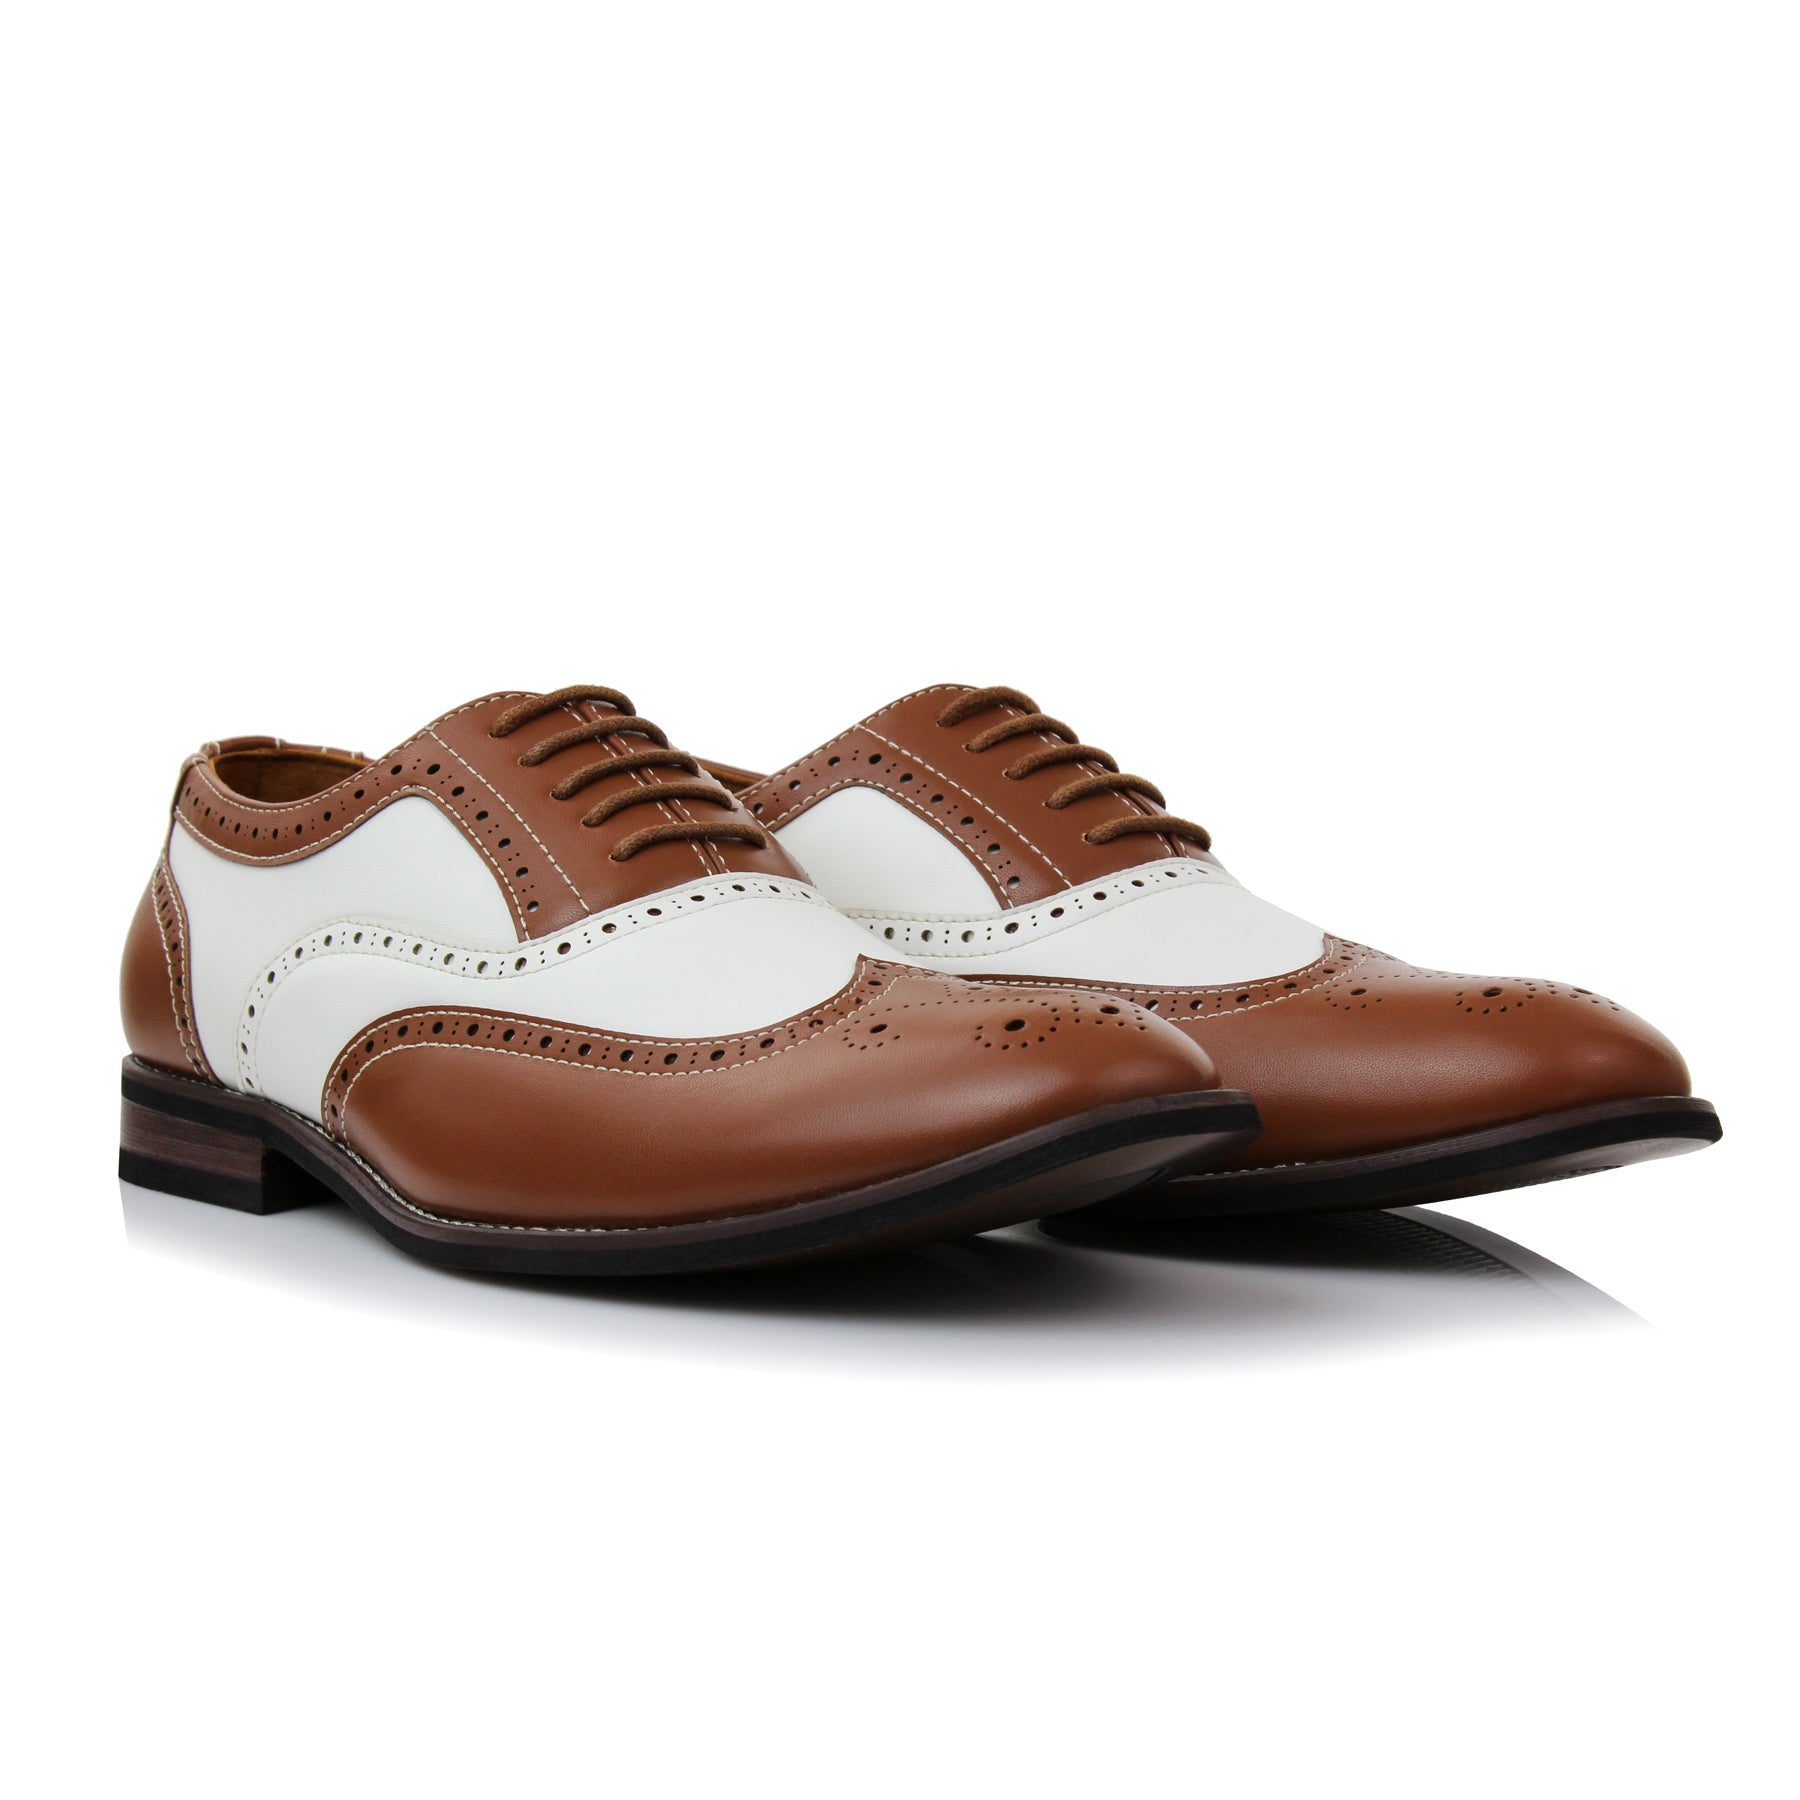 Two-Toned Brogue Wingtip Oxfords | Arthur by Ferro Aldo | Conal Footwear | Paired Angle View